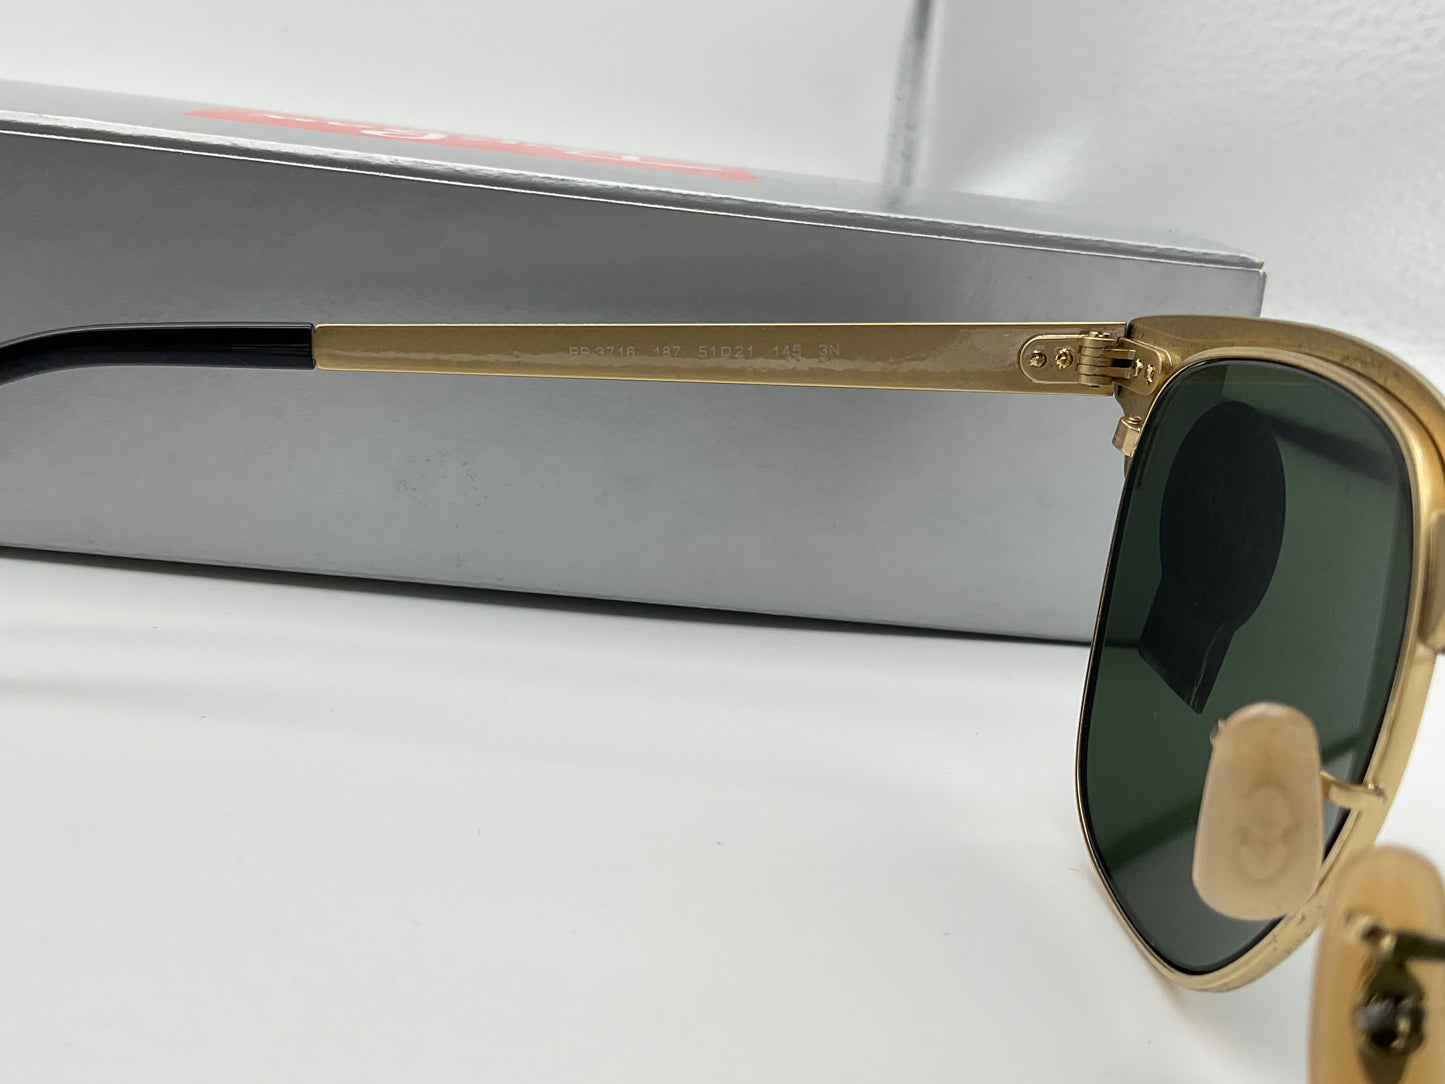 Ray-Ban Clubmaster 51mm Metal Green Lens Black Gold Frame Sunglasses RB3716 187 51